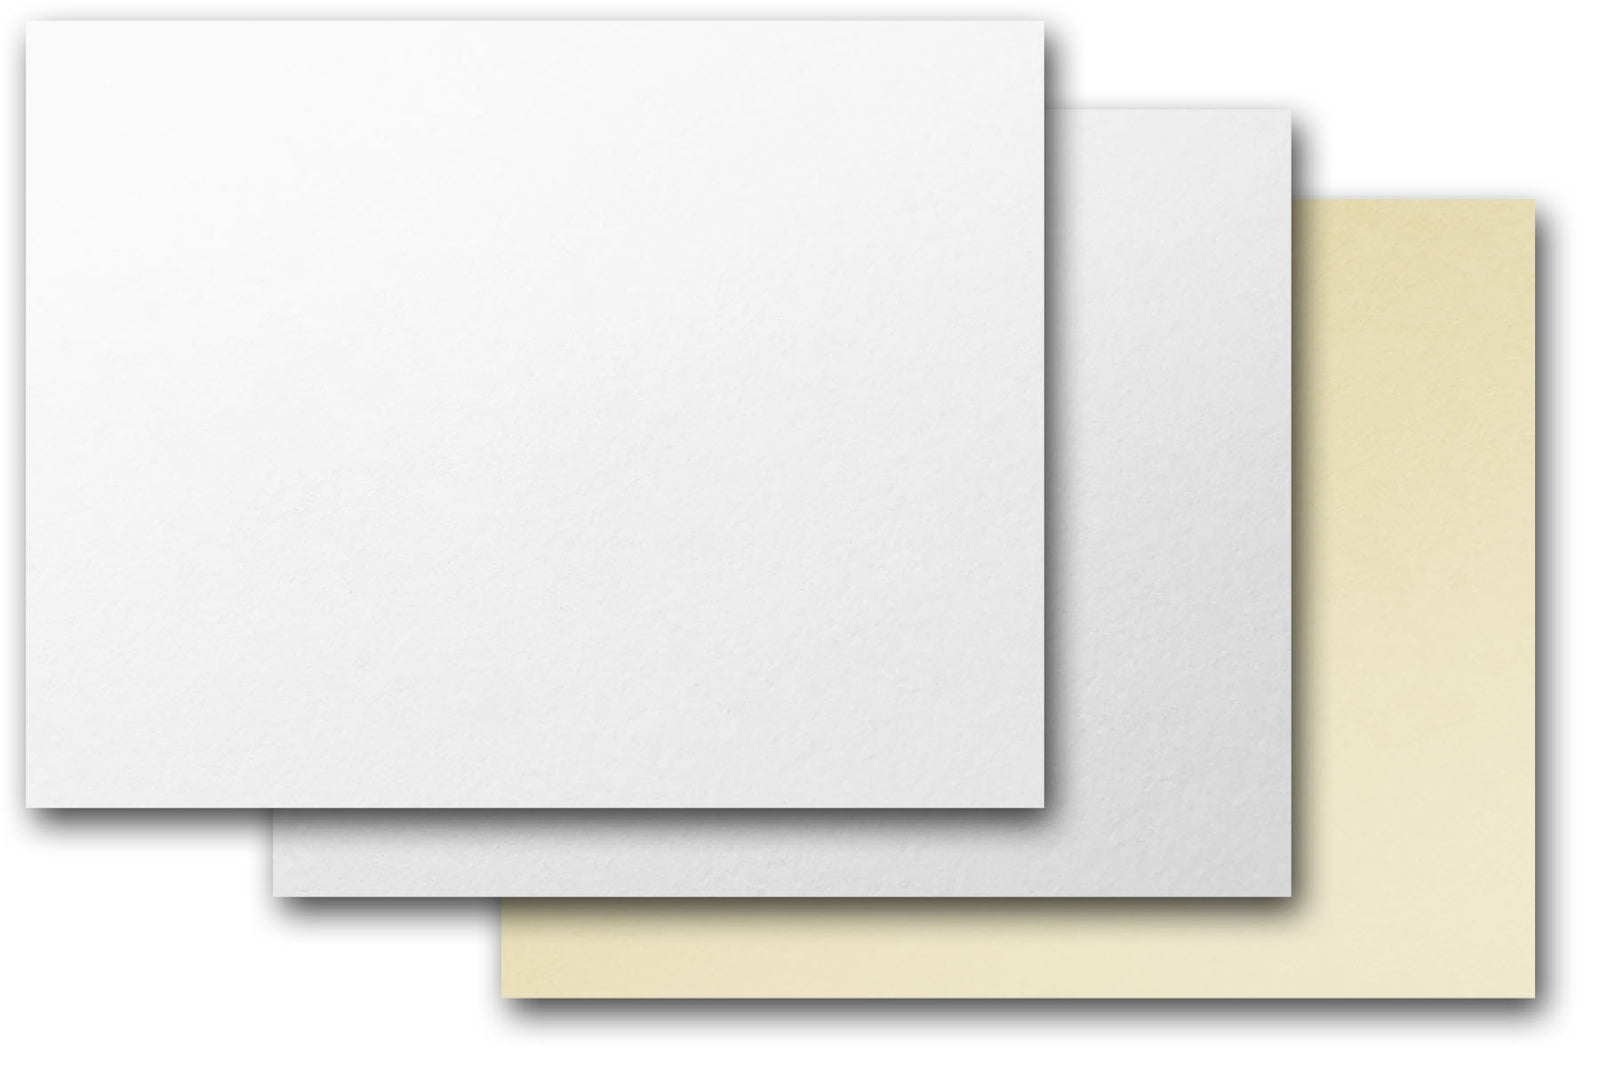 5x7 White Cards White or Ivory Invitation Cards Blank Cardstock